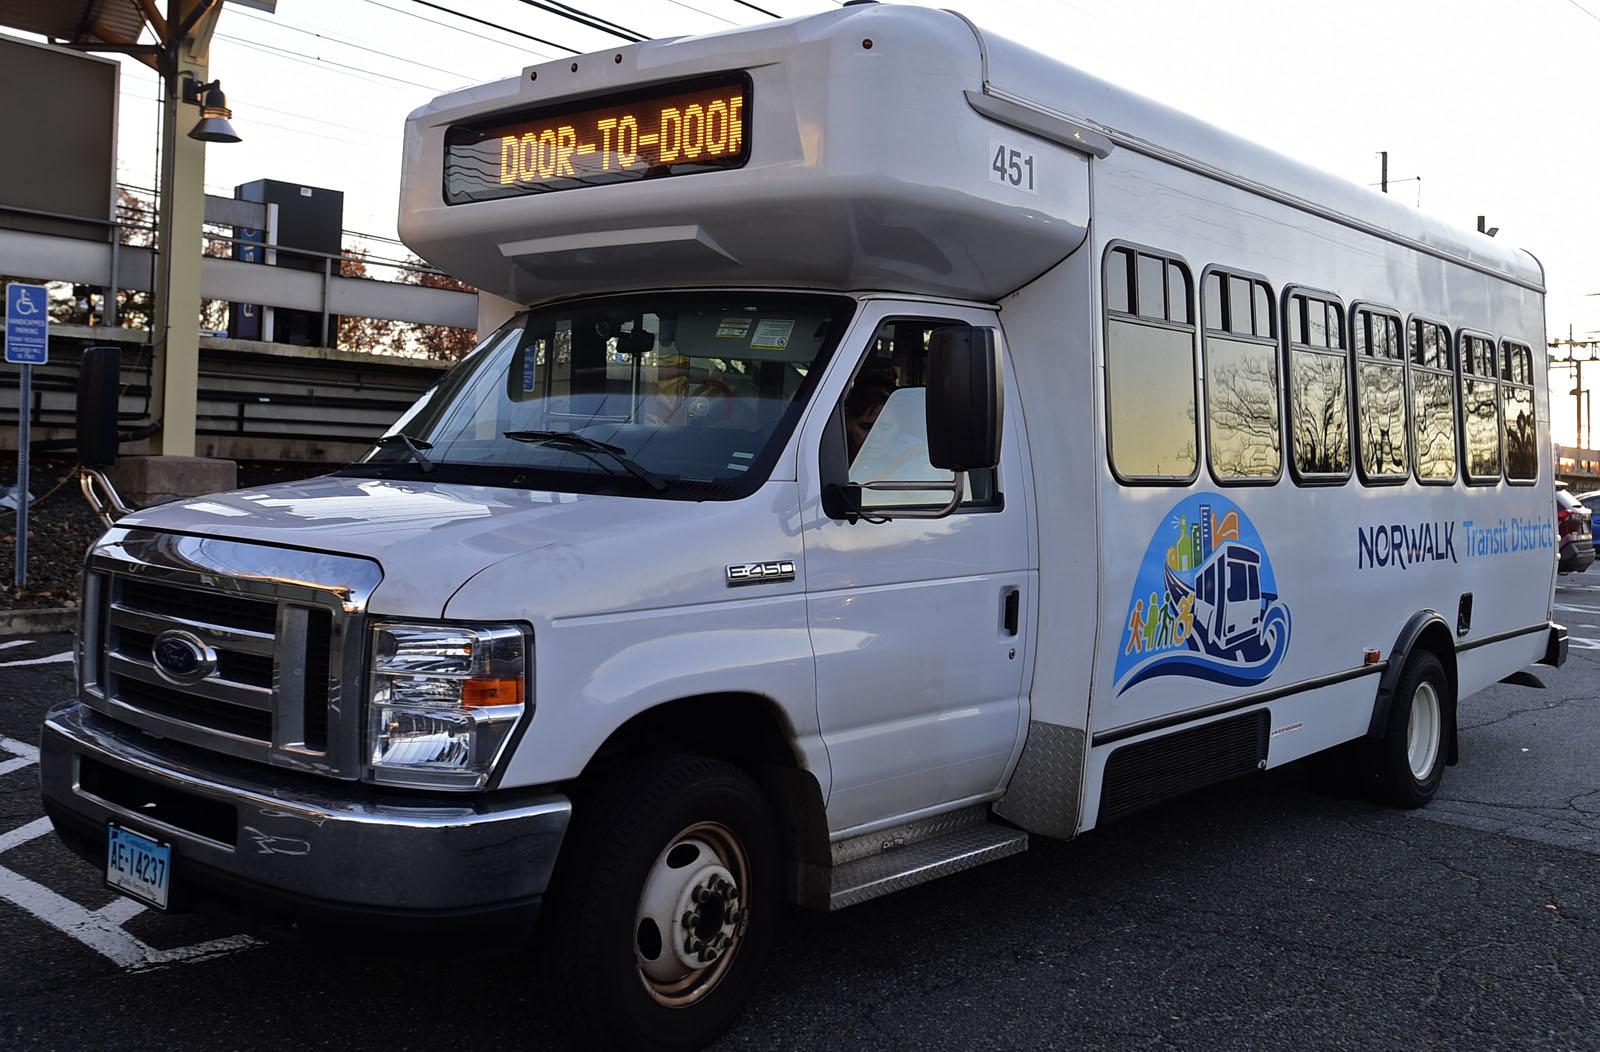 Trumbull will receive funding for a new on-demand shuttle service